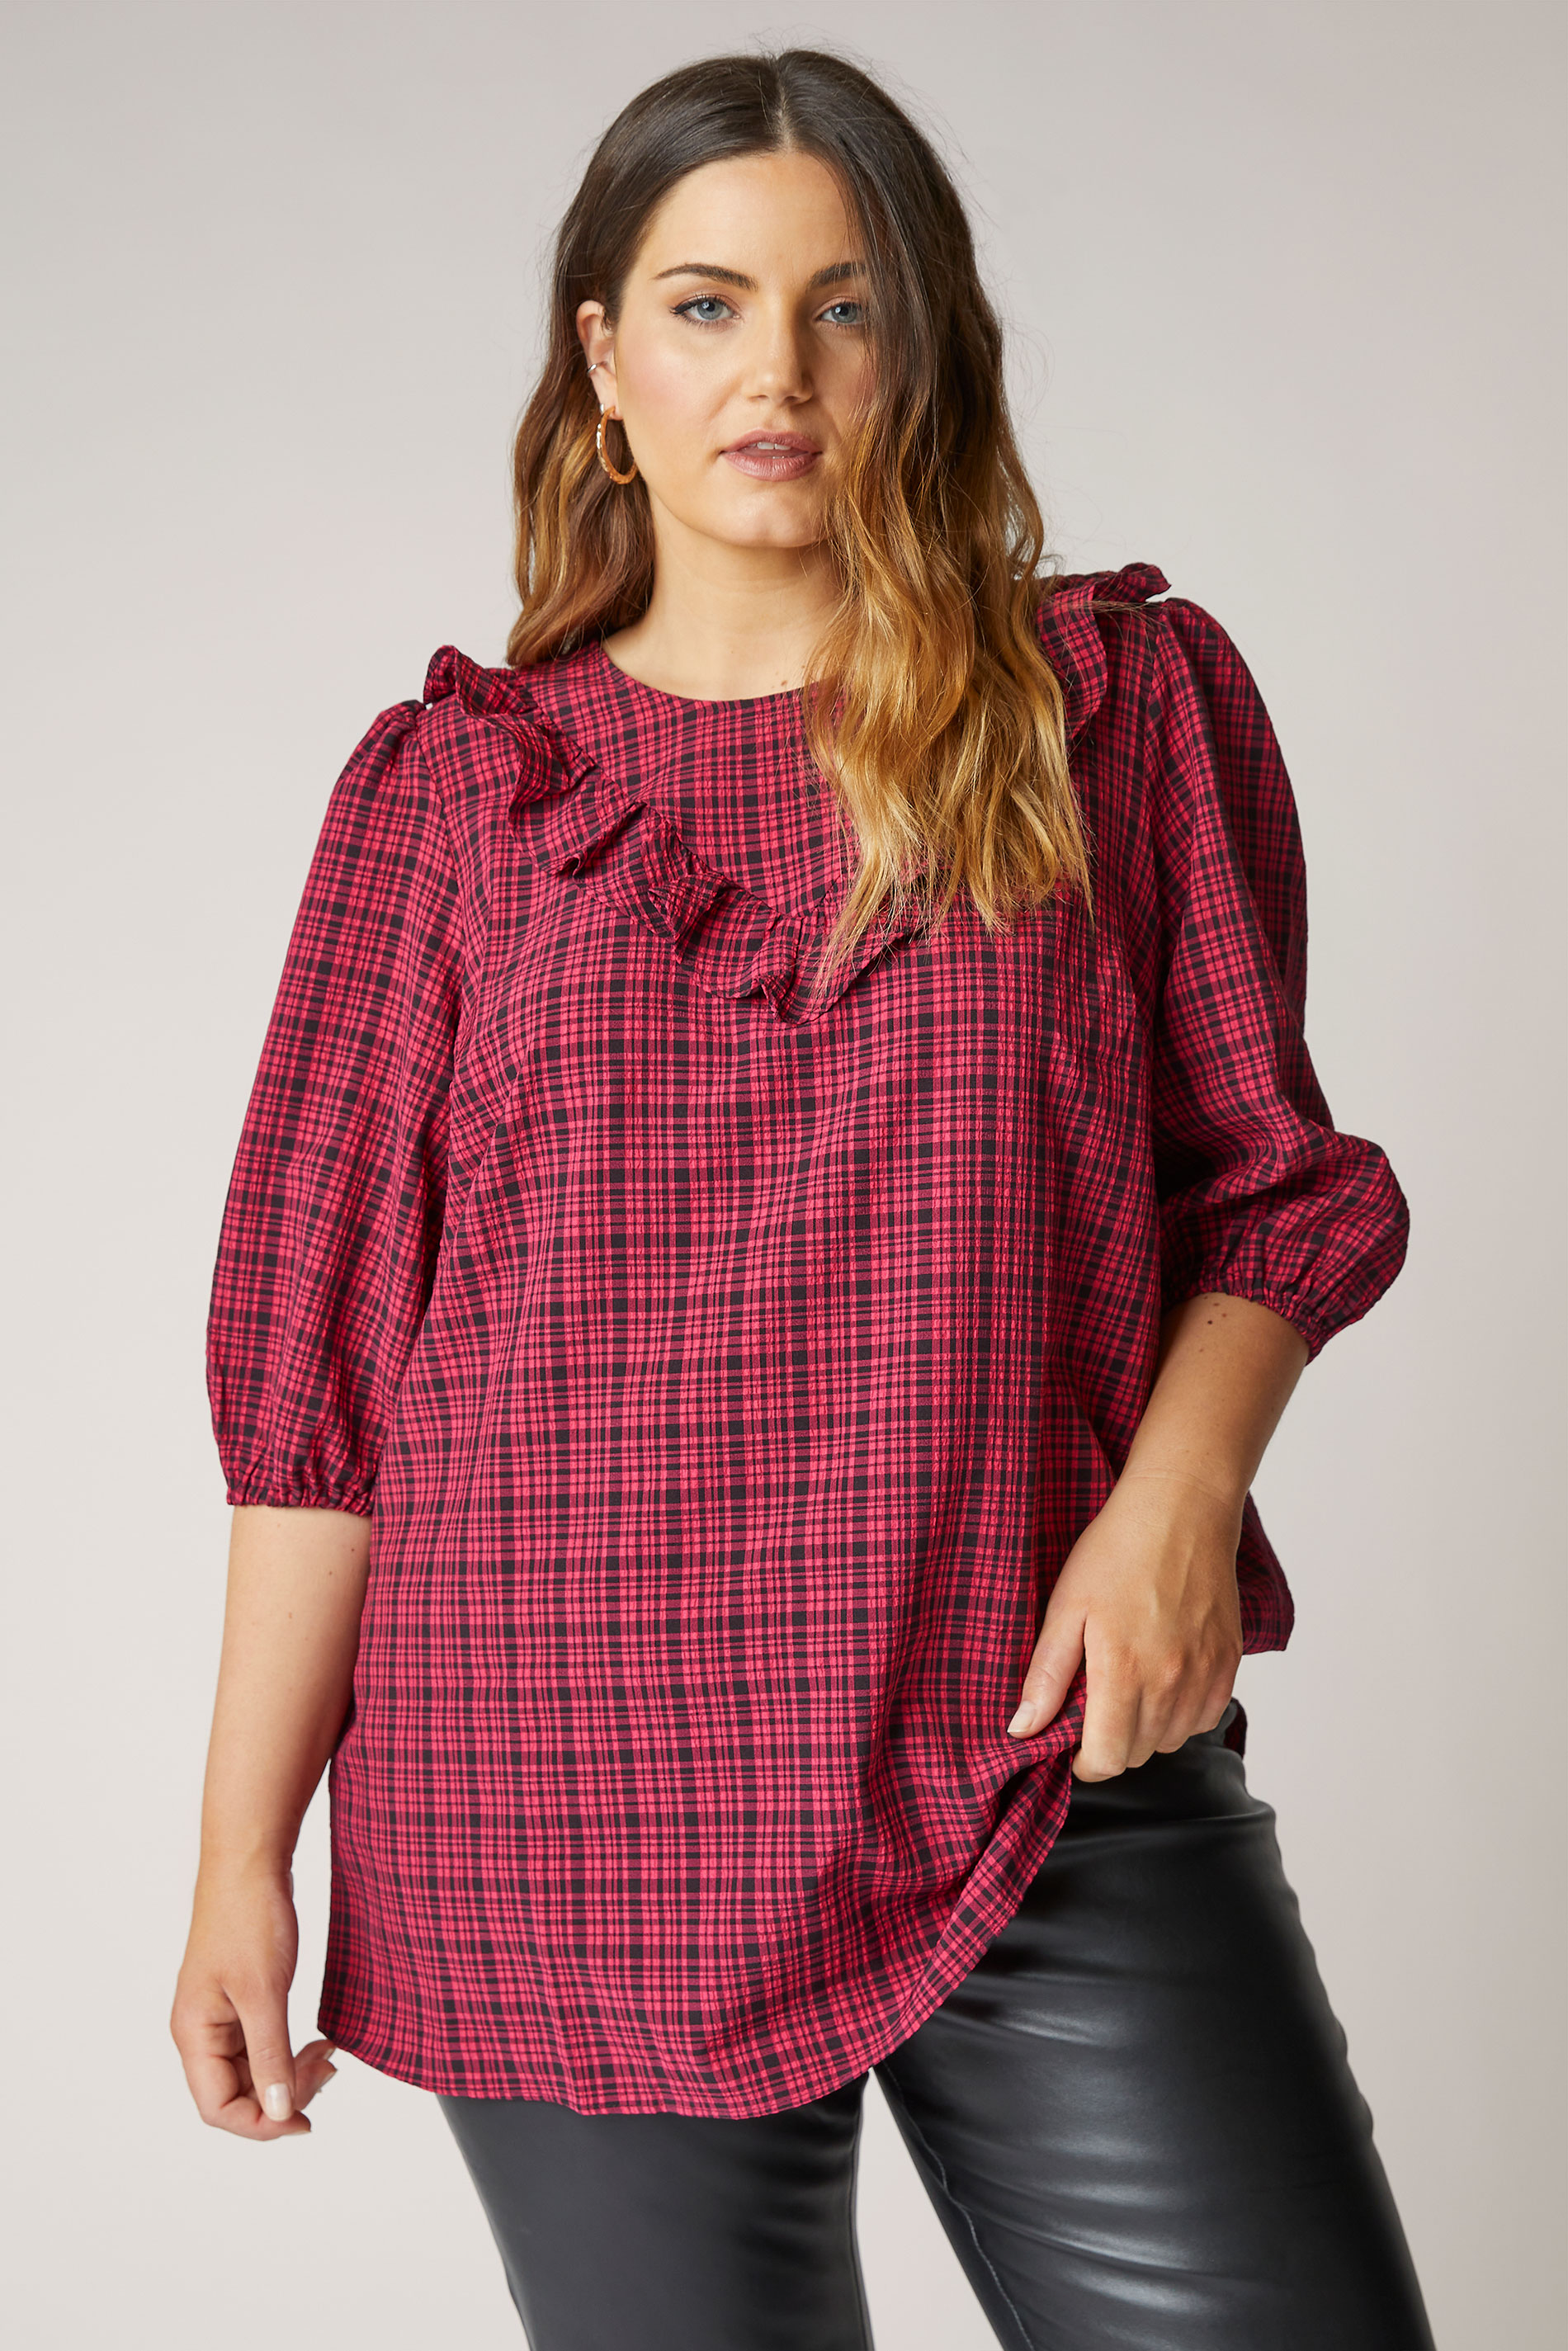 THE LIMITED EDIT Pink Chevron Frill Check Top_A.jpg